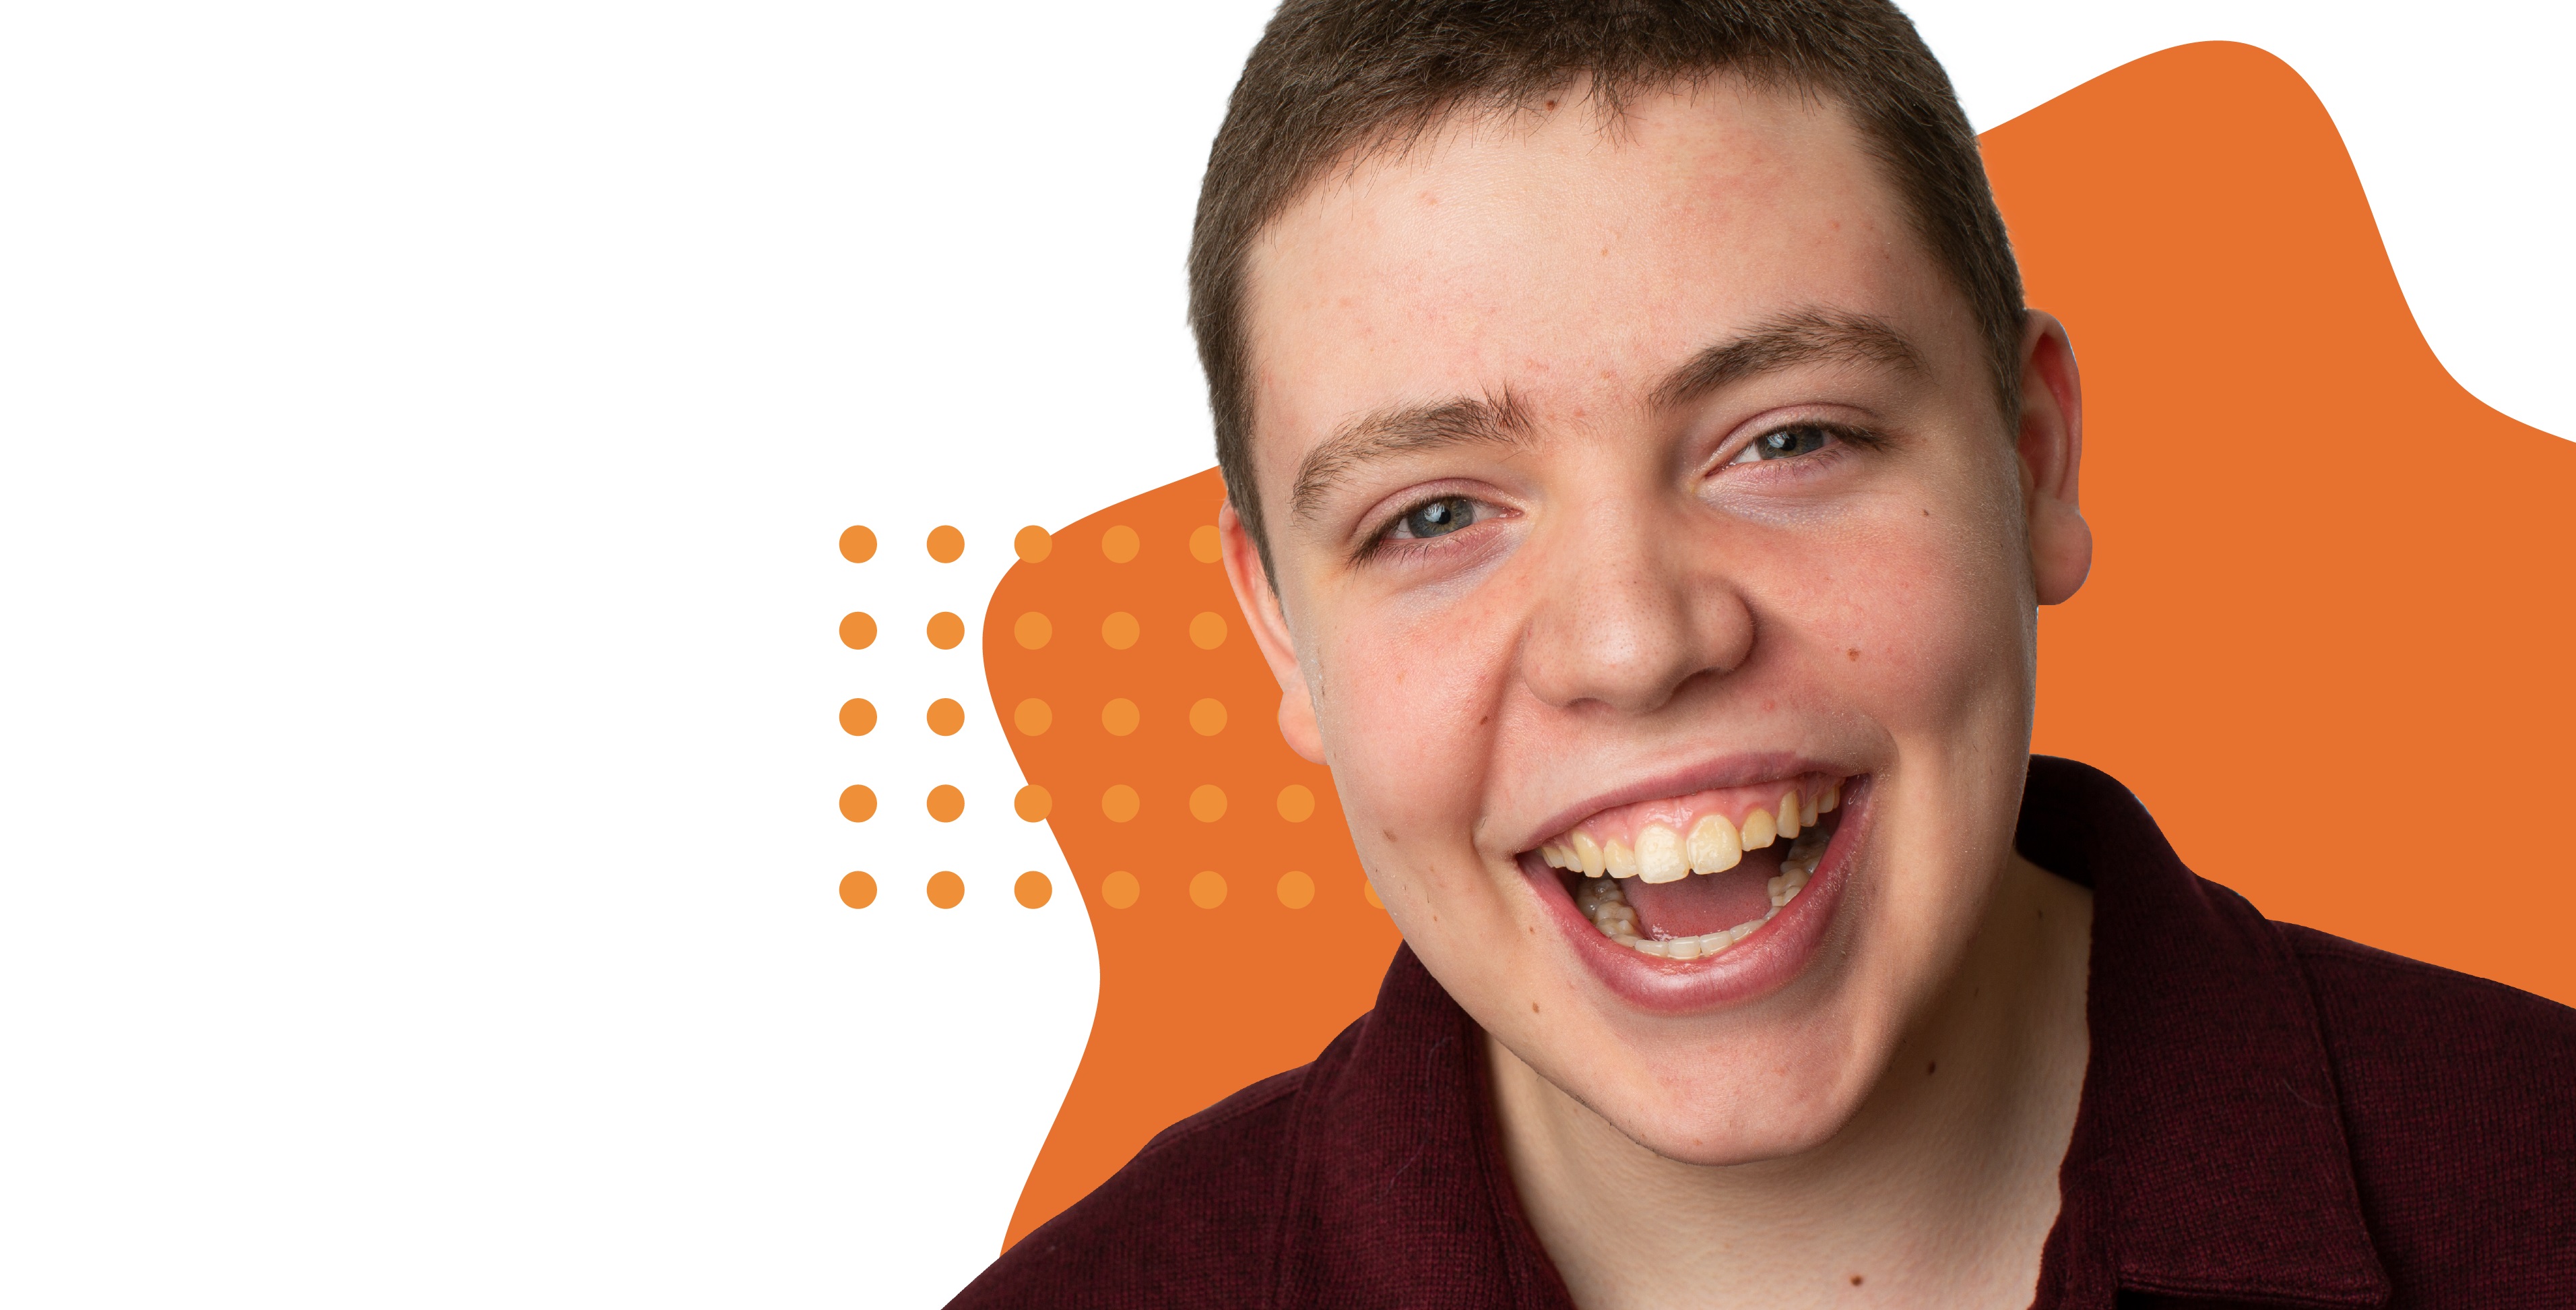 Adolescent white male with a disability smiling in front of a white and orange illustrated abstract background.